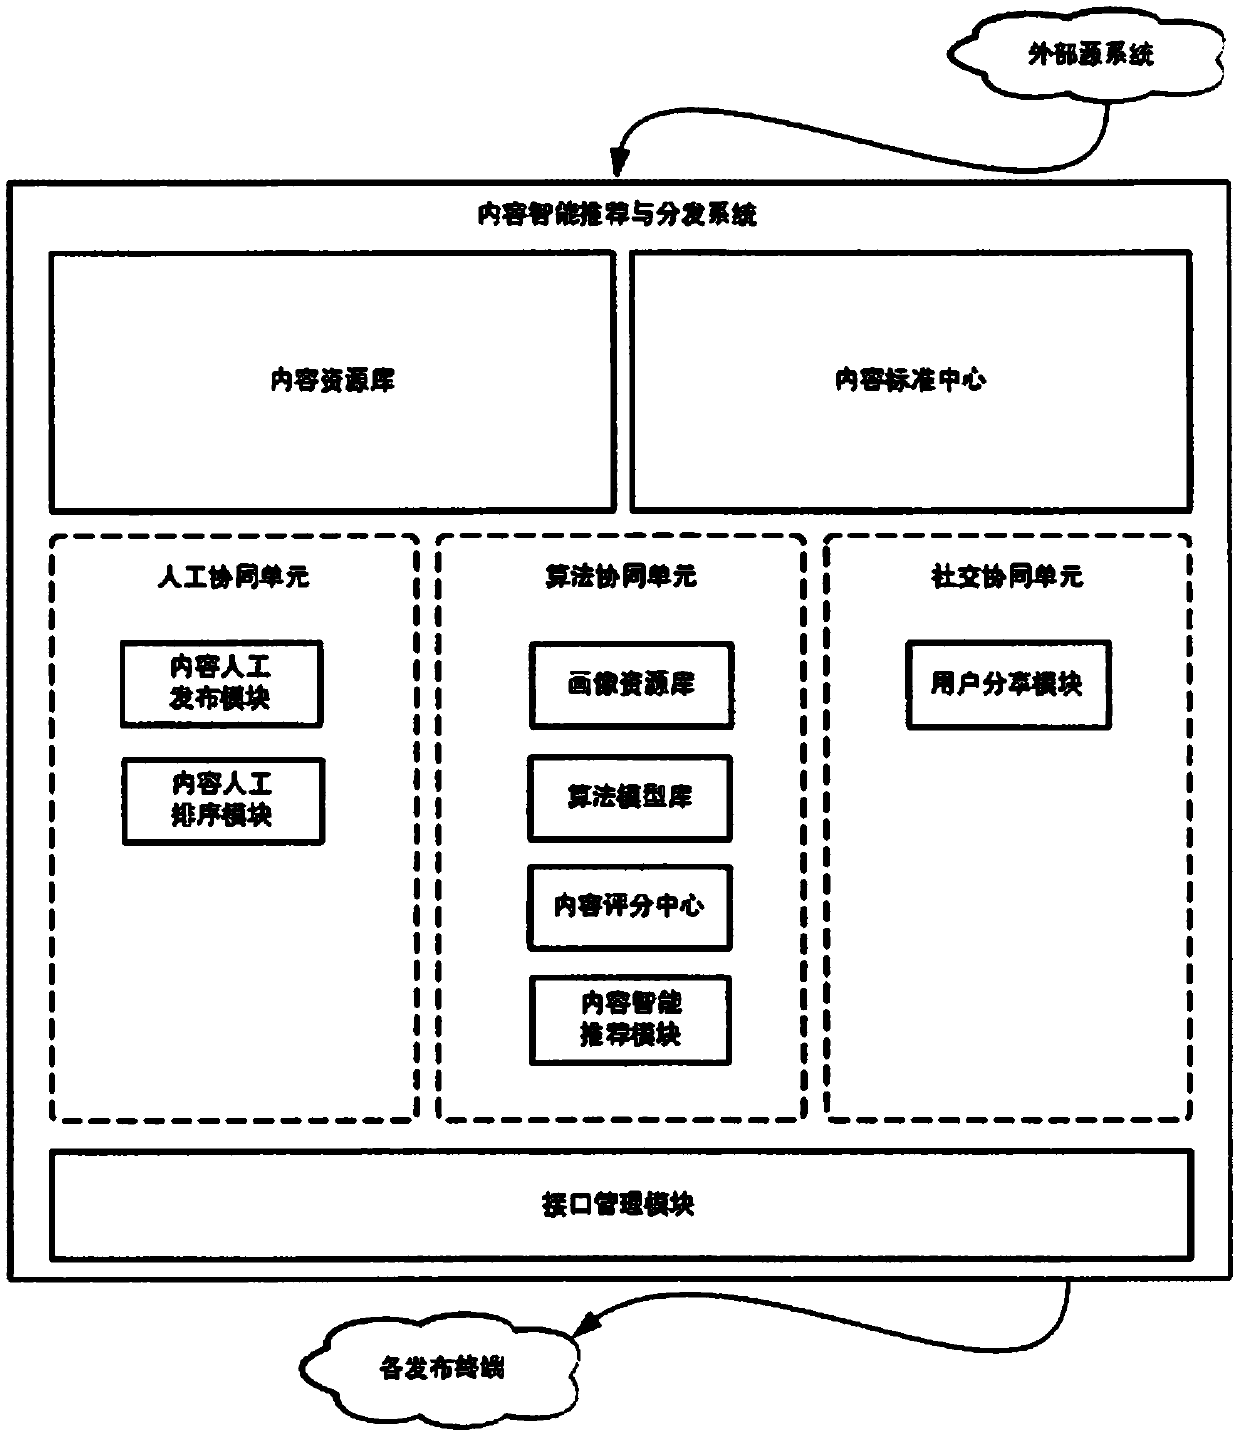 Content intelligent recommendation and distribution method and system based on multi-element collaboration